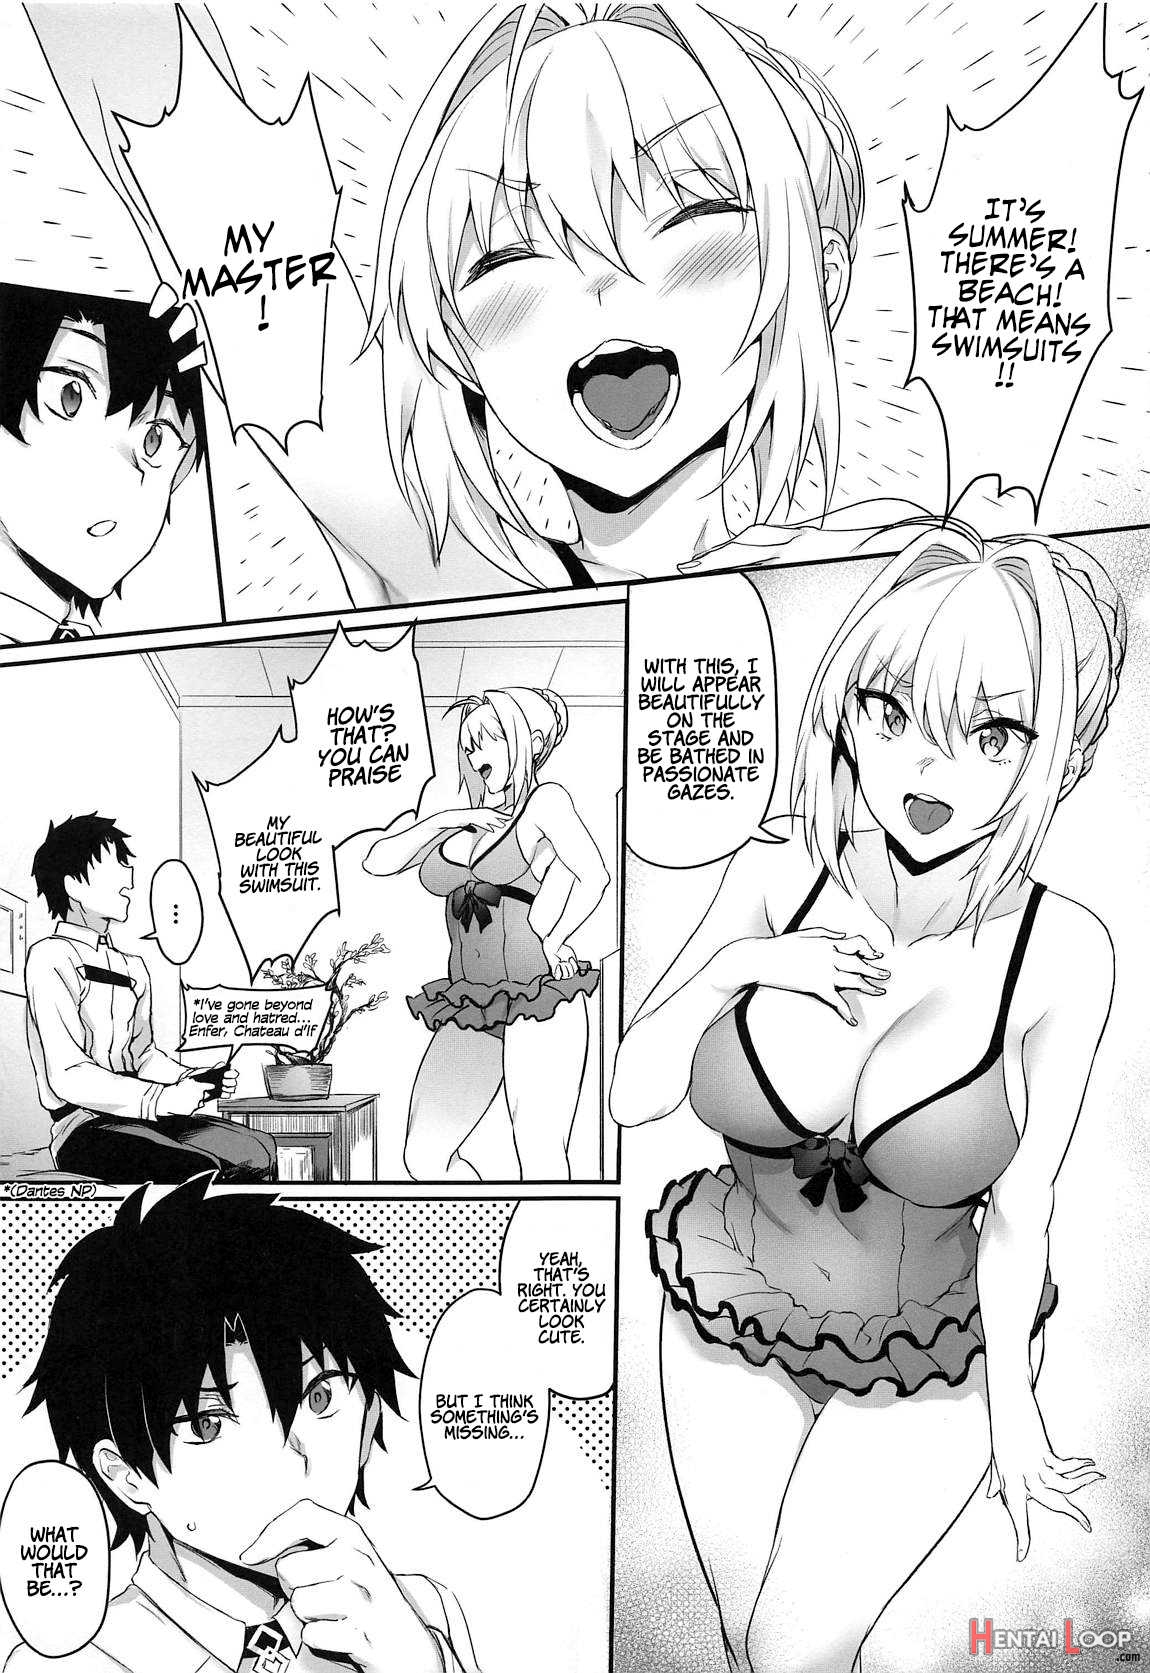 The Emperorâ€™s New Swimsuit page 2